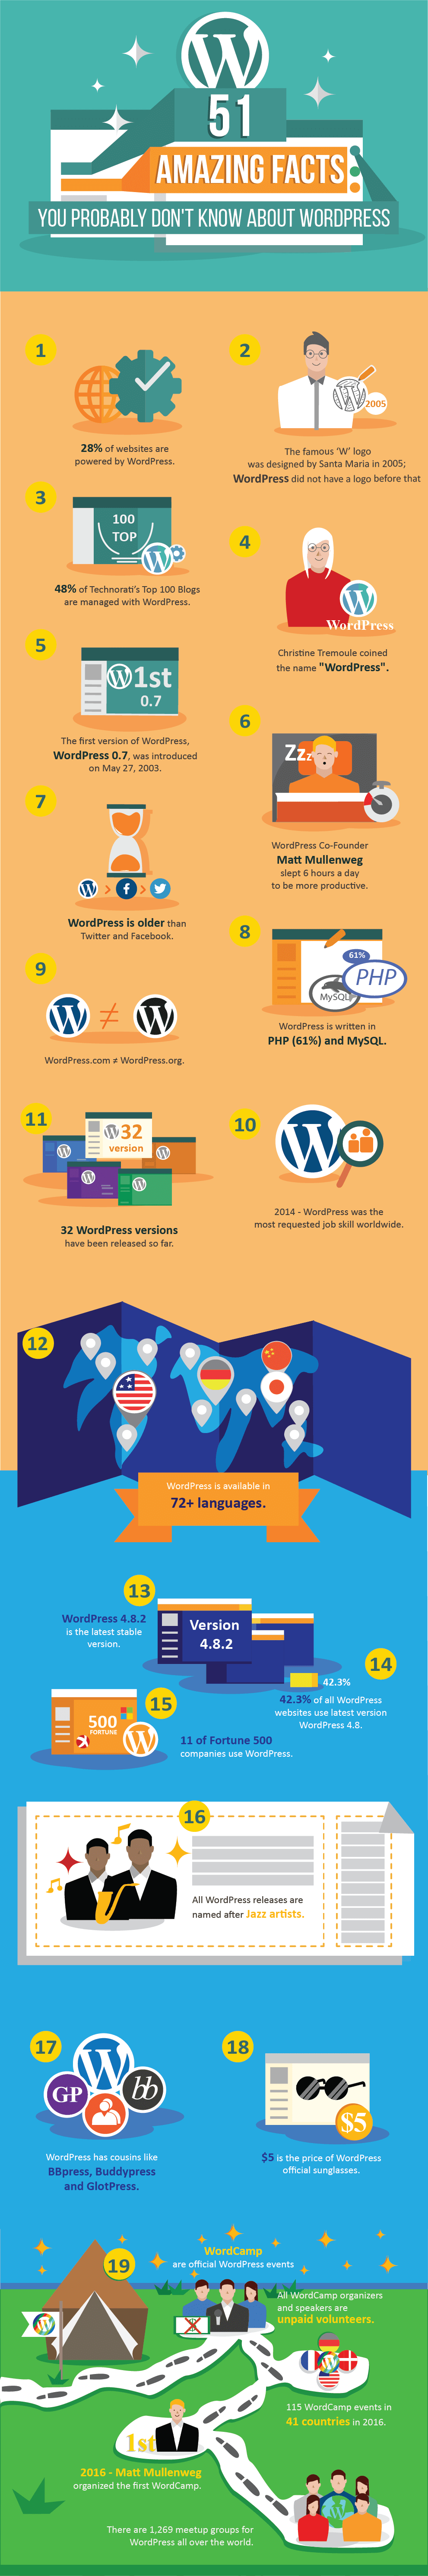 WordPress infographic with 51 fascinating facts